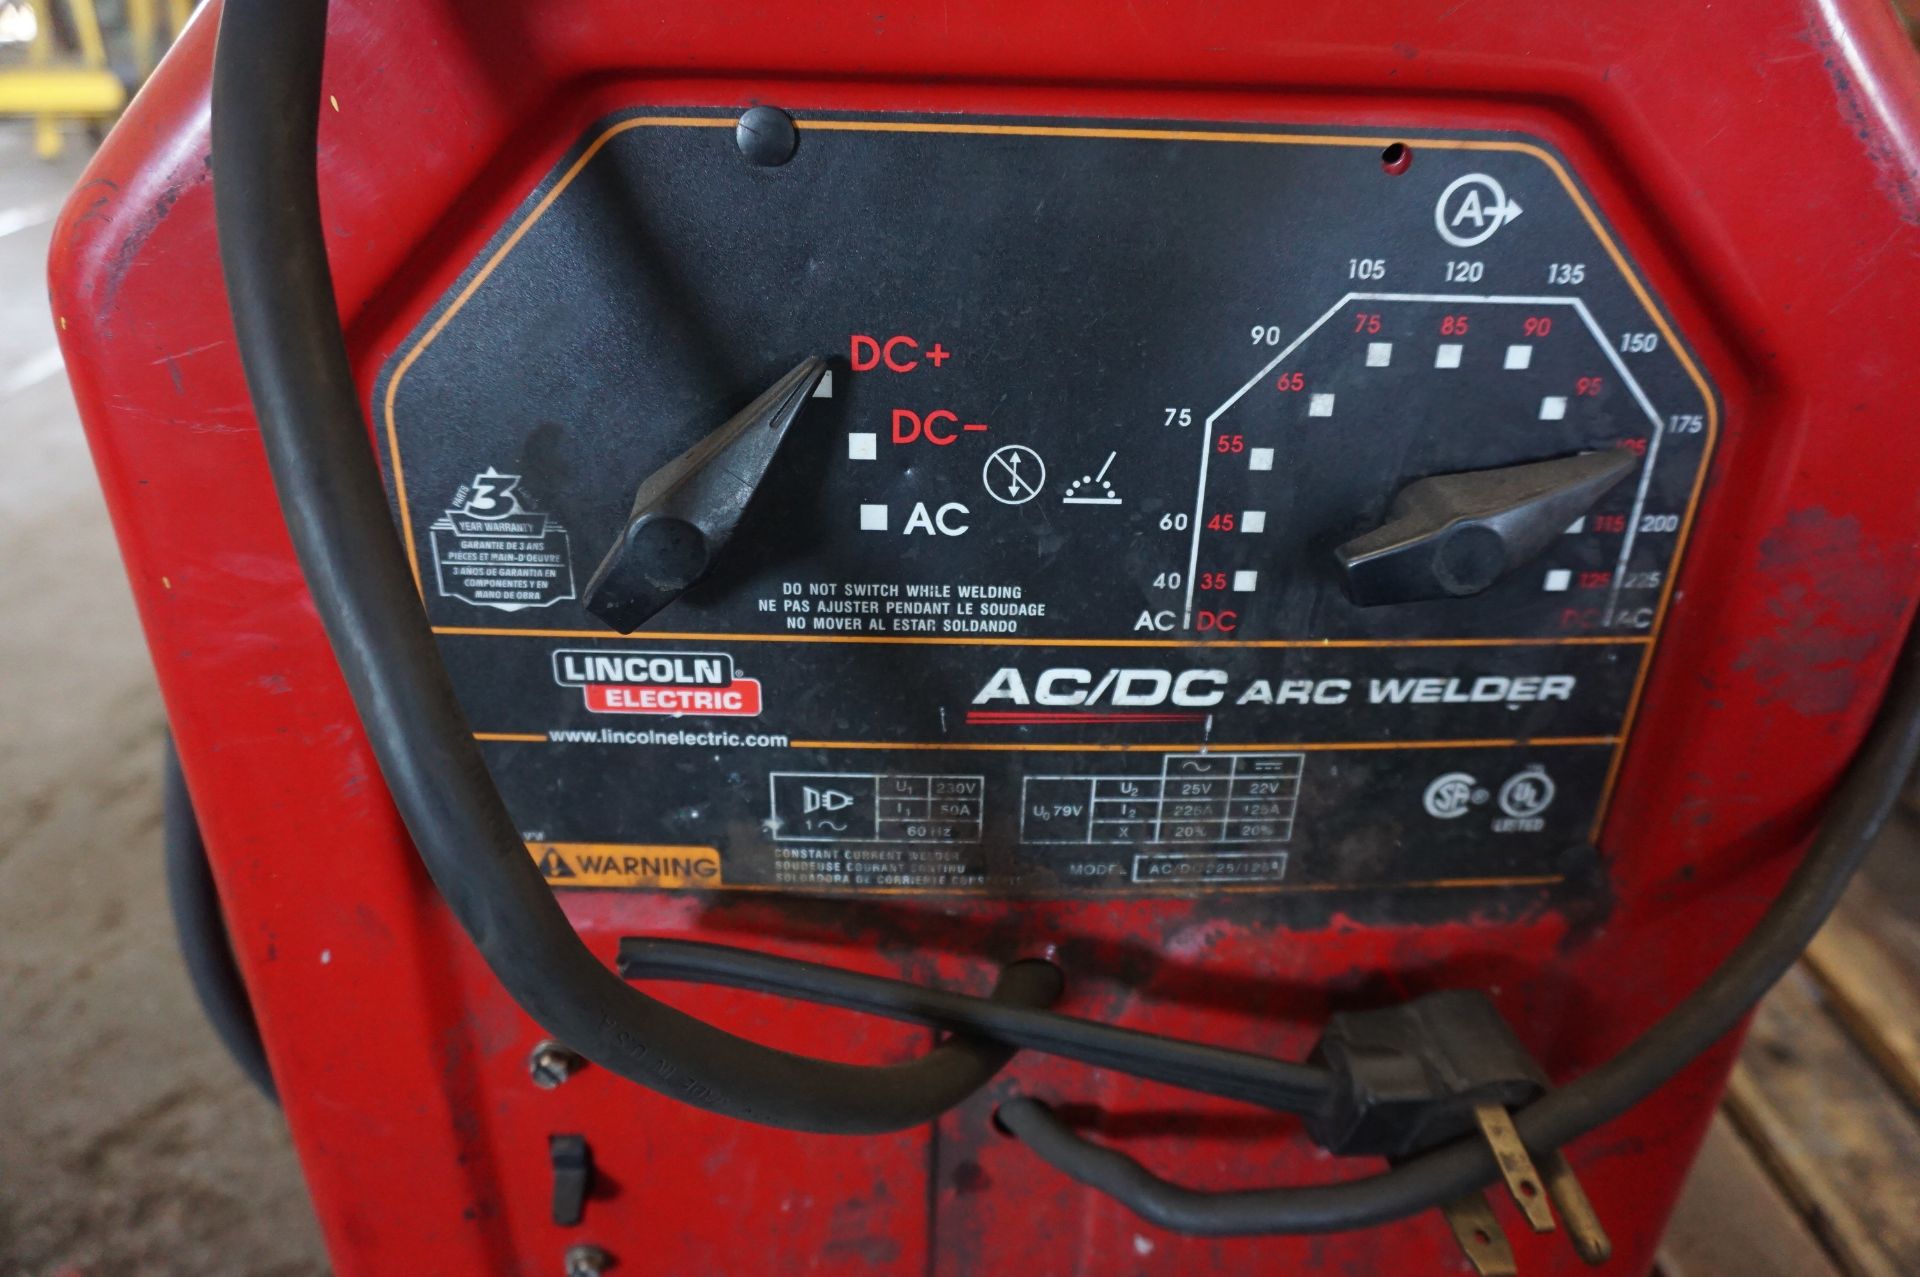 LOT TO INCLUDE: (1) MILLER MILLERMATIC 175 WIRE WELDER, (1) LINCOLN AC/DC ARC WELDER, (1) - Image 3 of 6